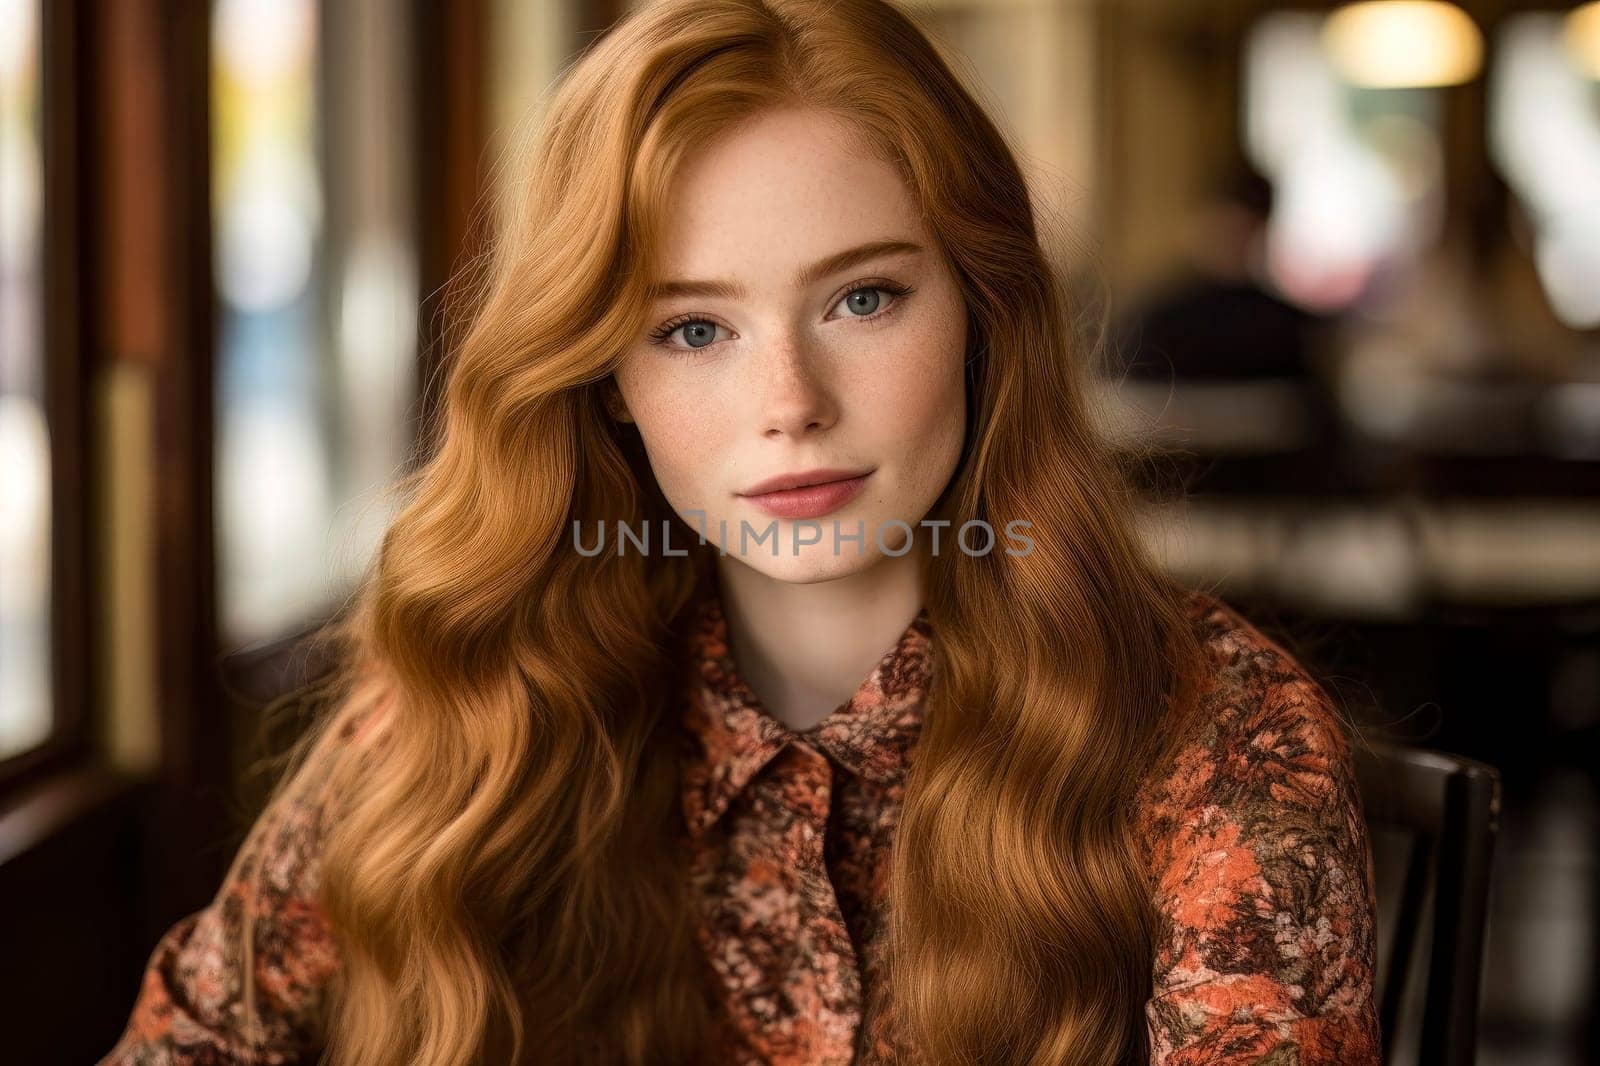 Discover the beauty and charm of this adorable redhead in a captivating portrait.